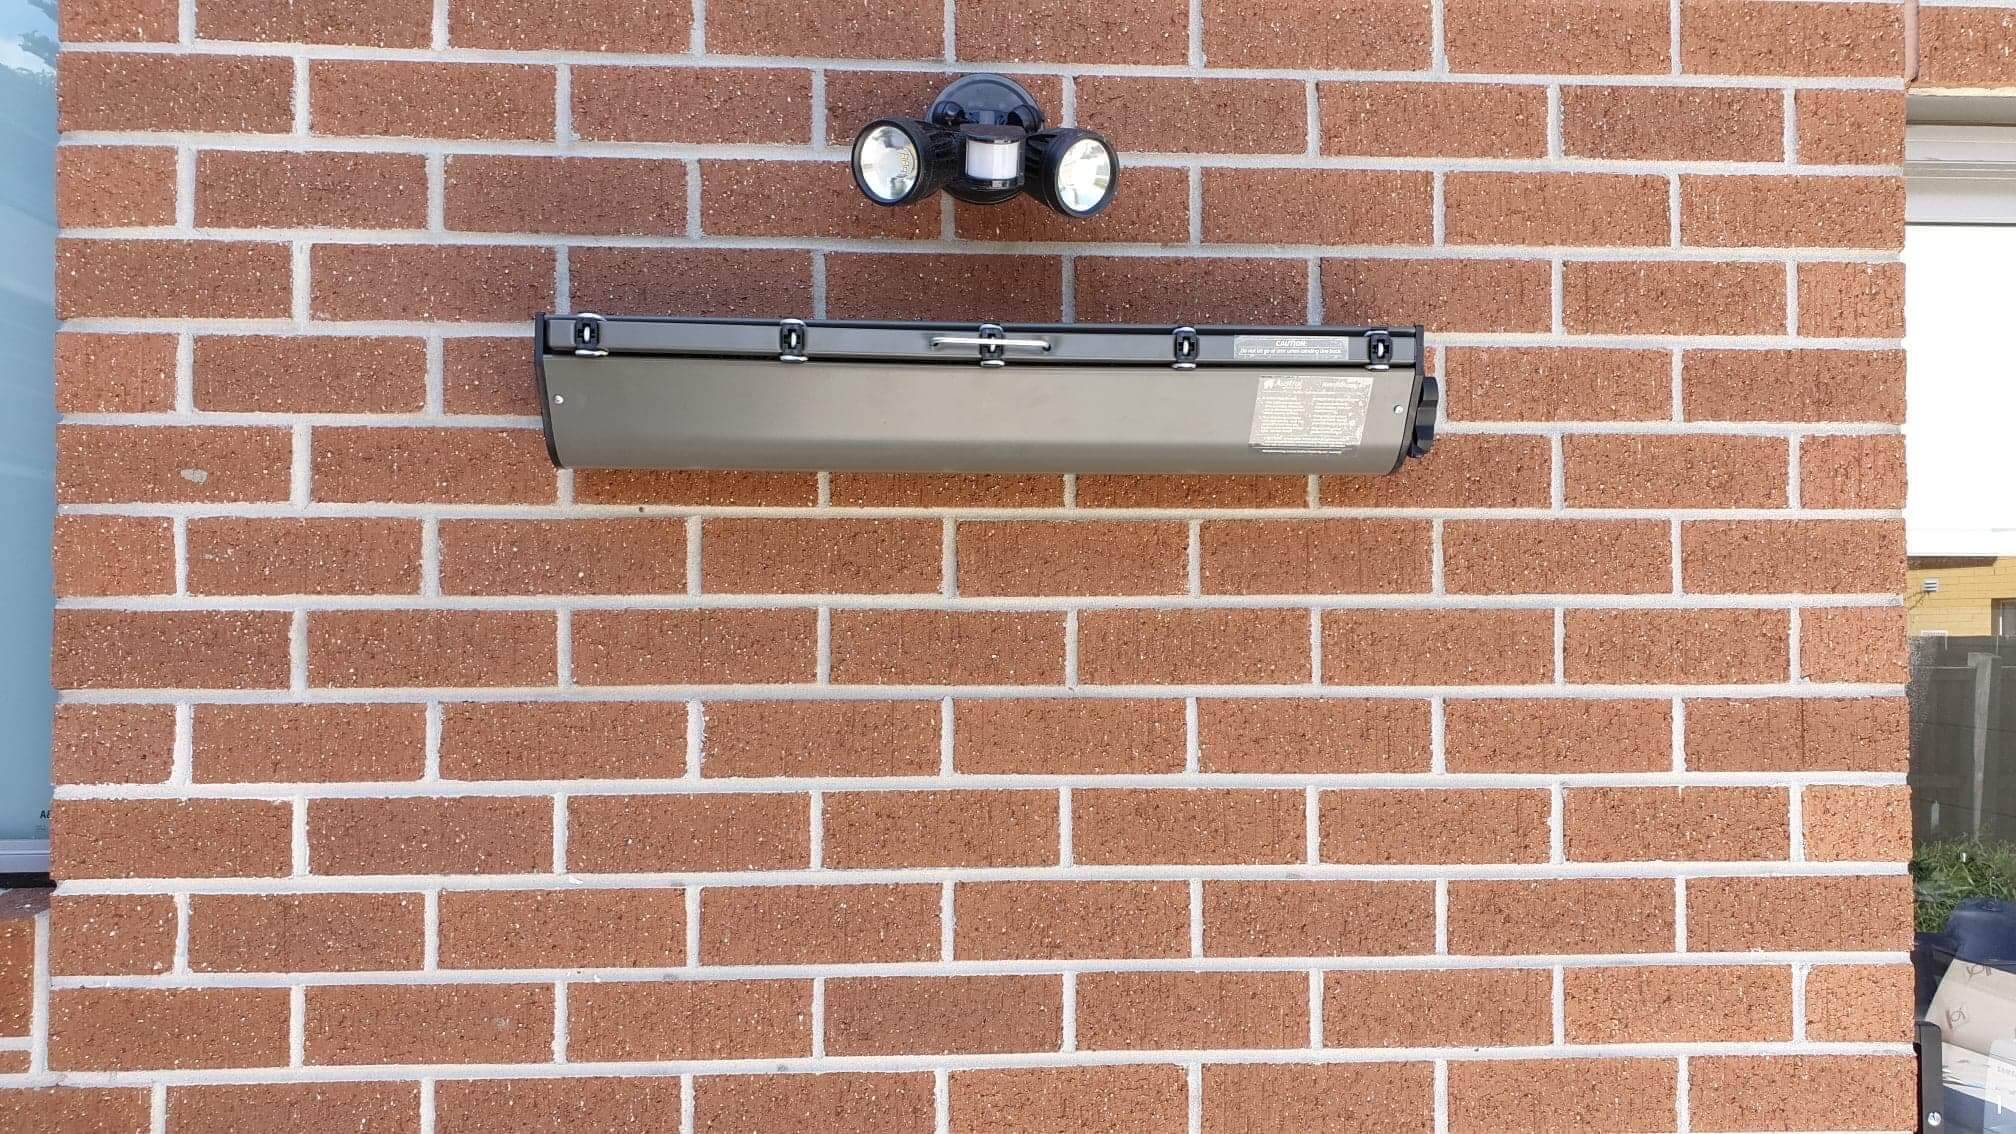 Wall mounted retractable austral clothesline installation onto brick wall at home in Caulfield, Melbourne.